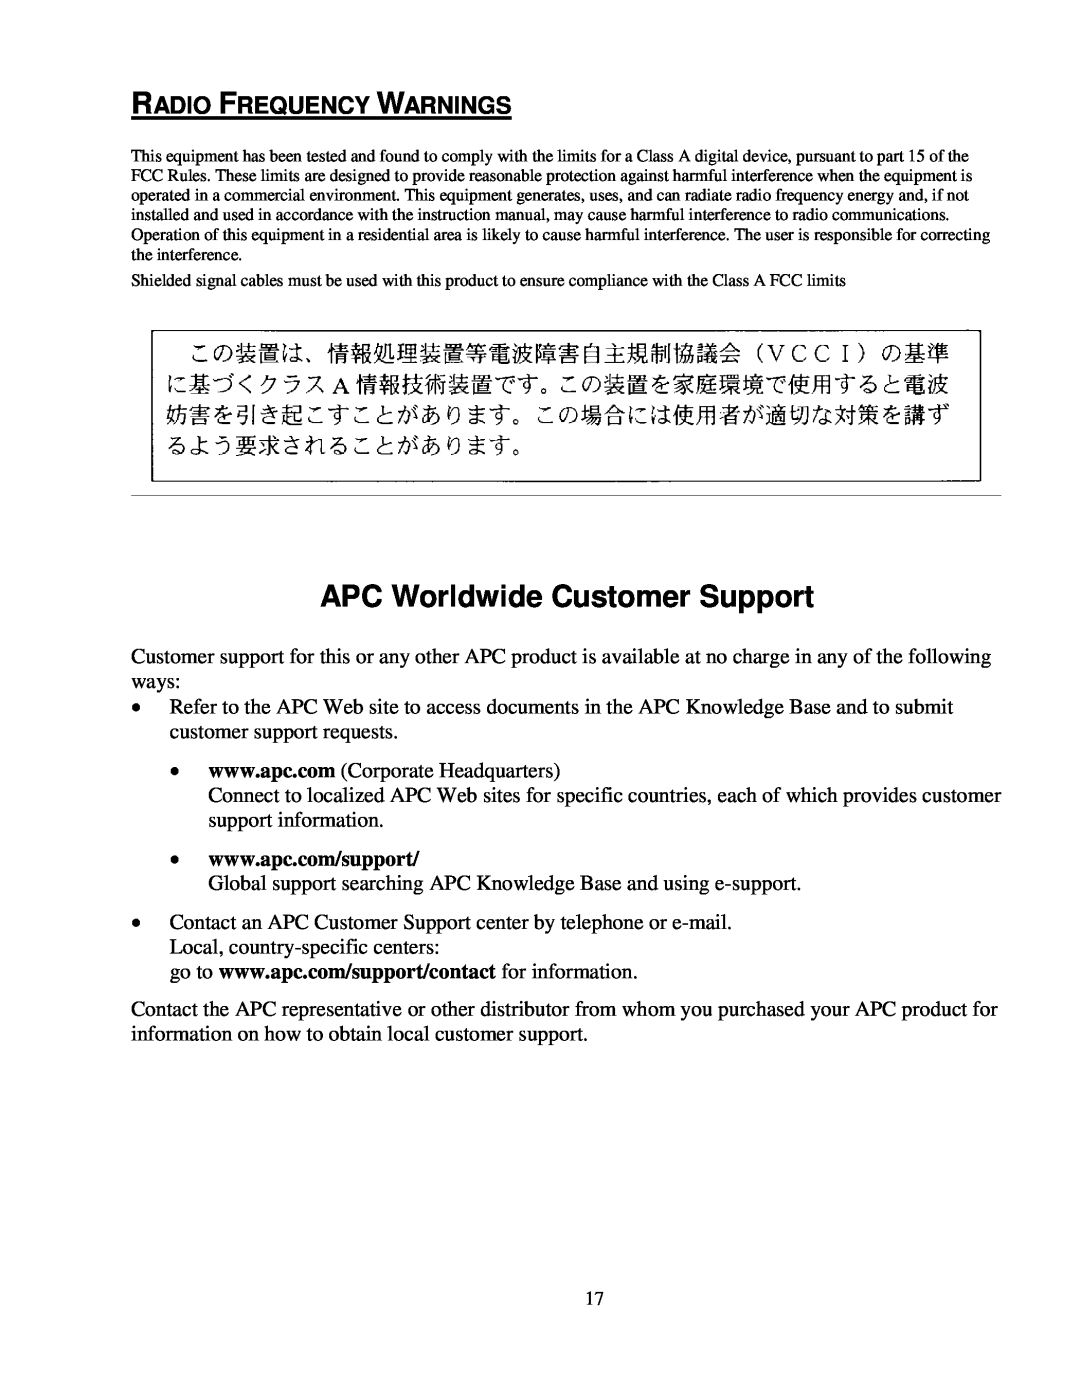 Smart Inventions 990-2689E manual APC Worldwide Customer Support, Radio Frequency Warnings 